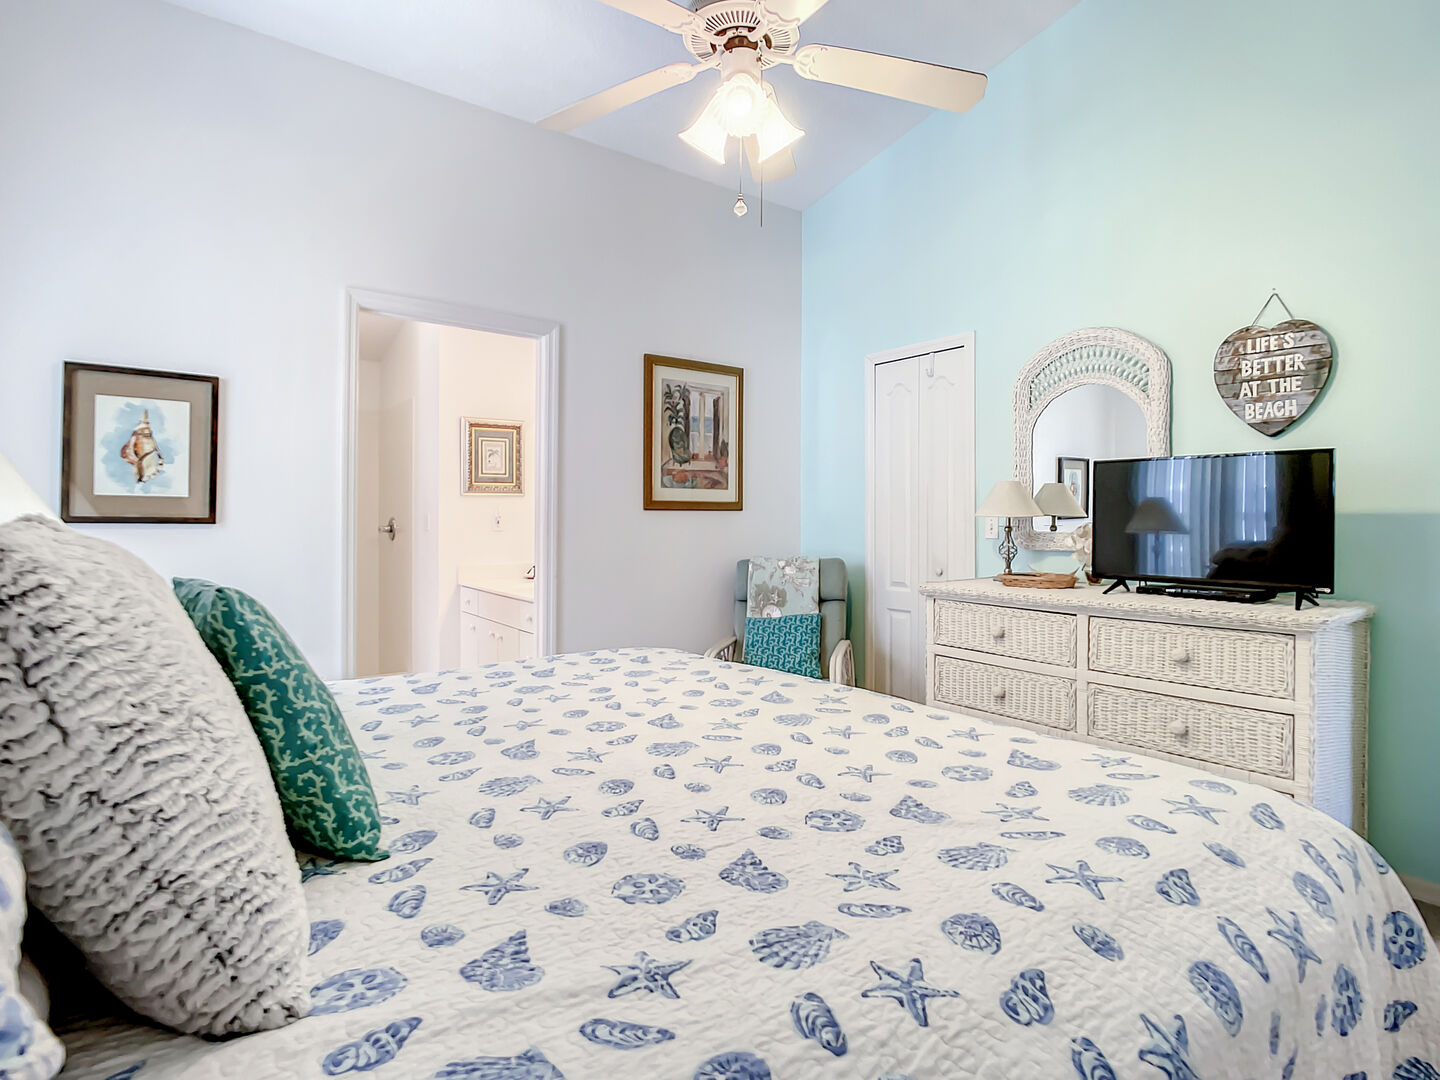 Just off the living room is the spacious master bedroom with king sized bed.